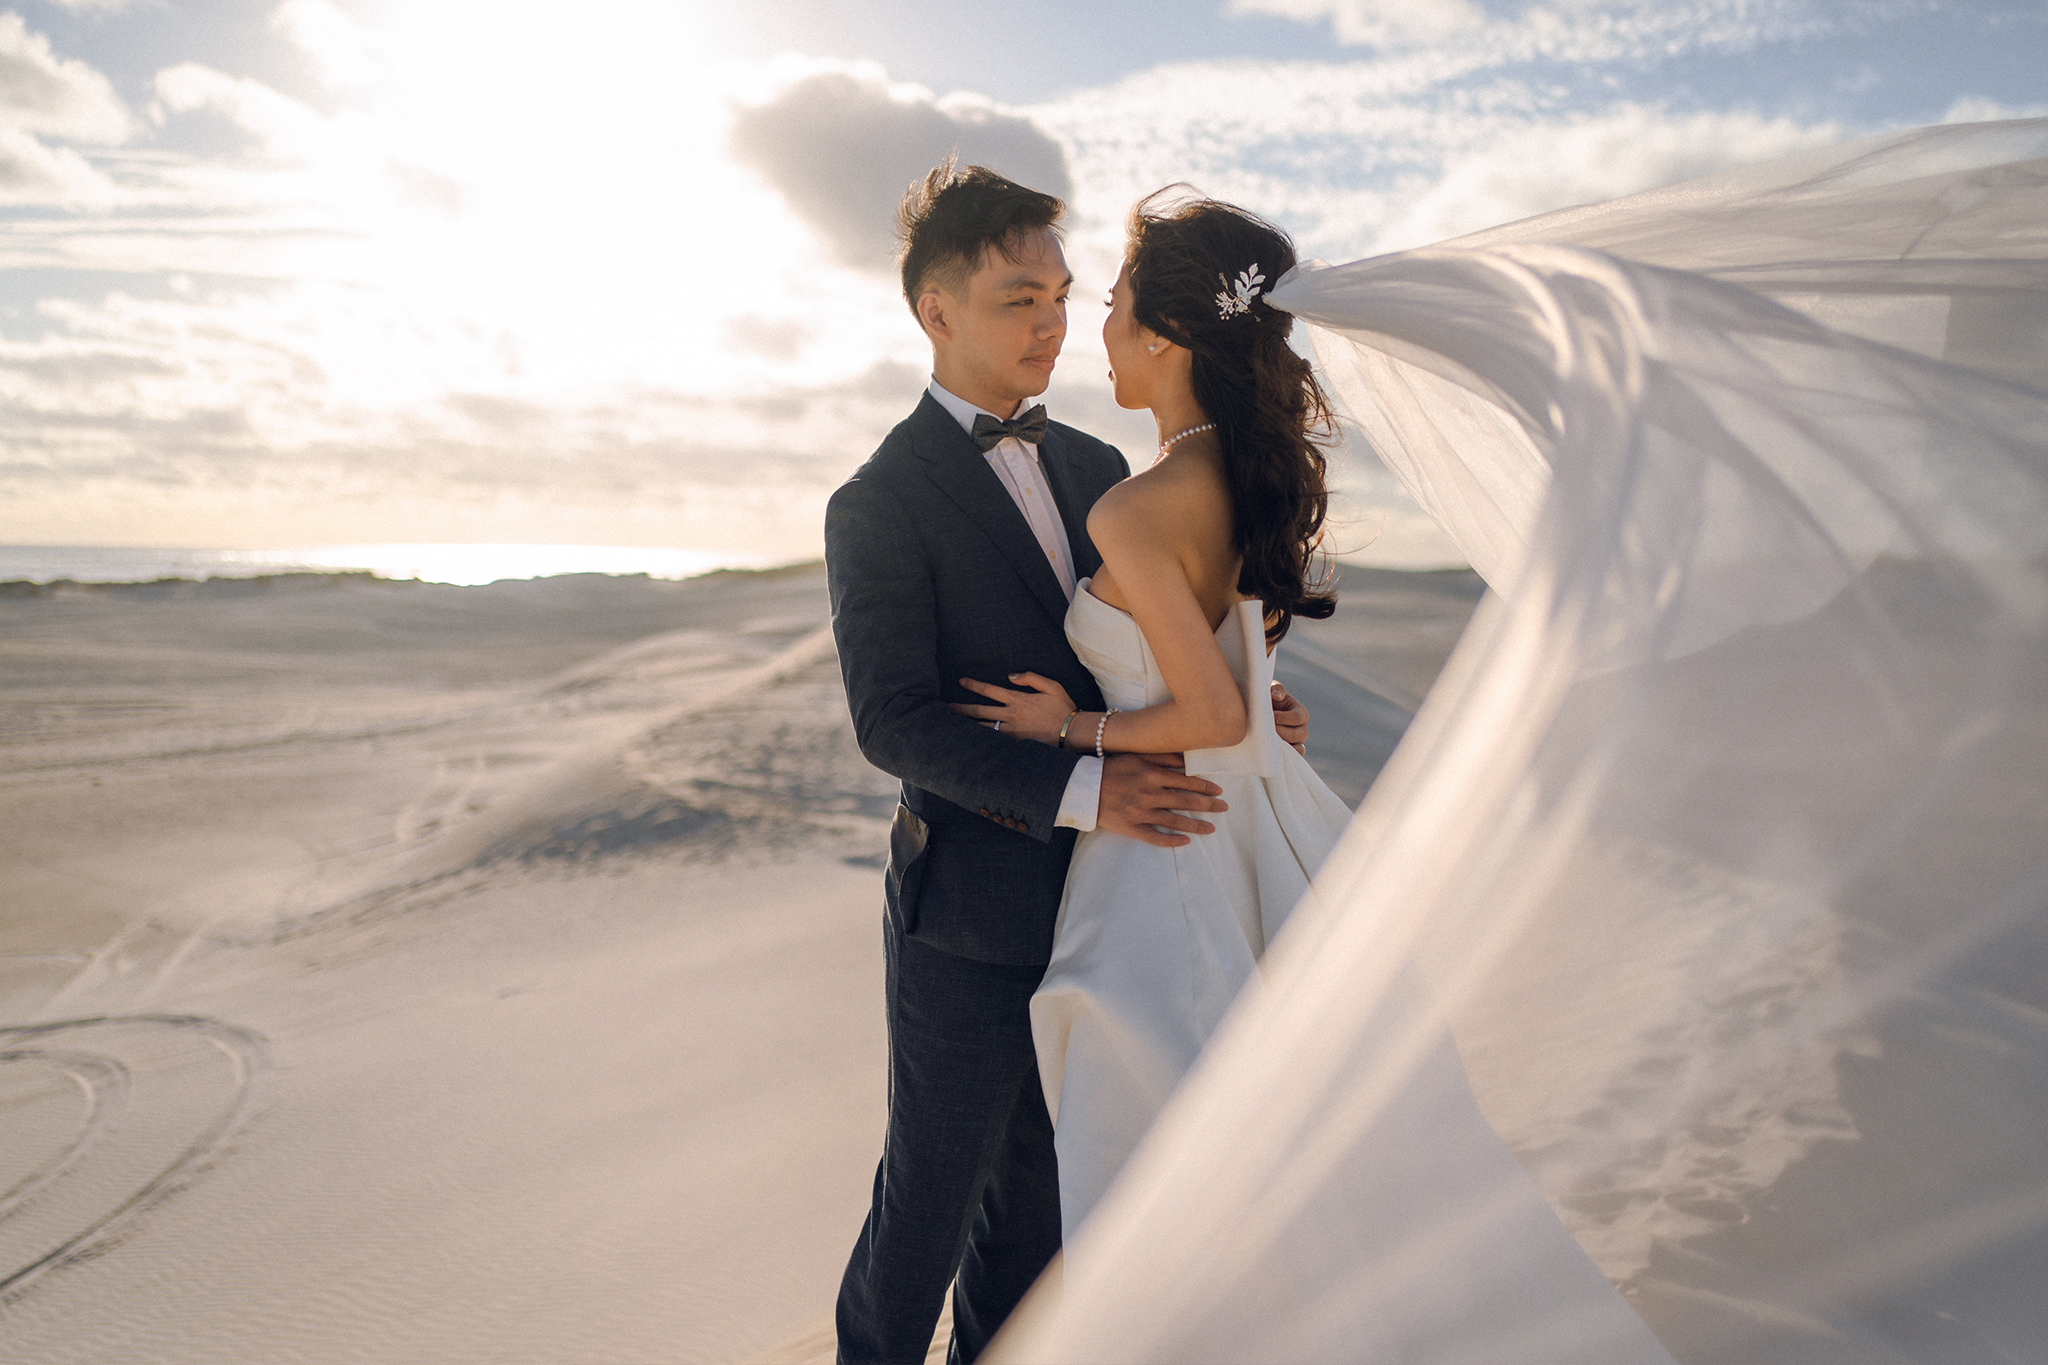 Perth Pre-Wedding Photoshoot at Lancelin Desert & Bells Lookout by Jimmy on OneThreeOneFour 23